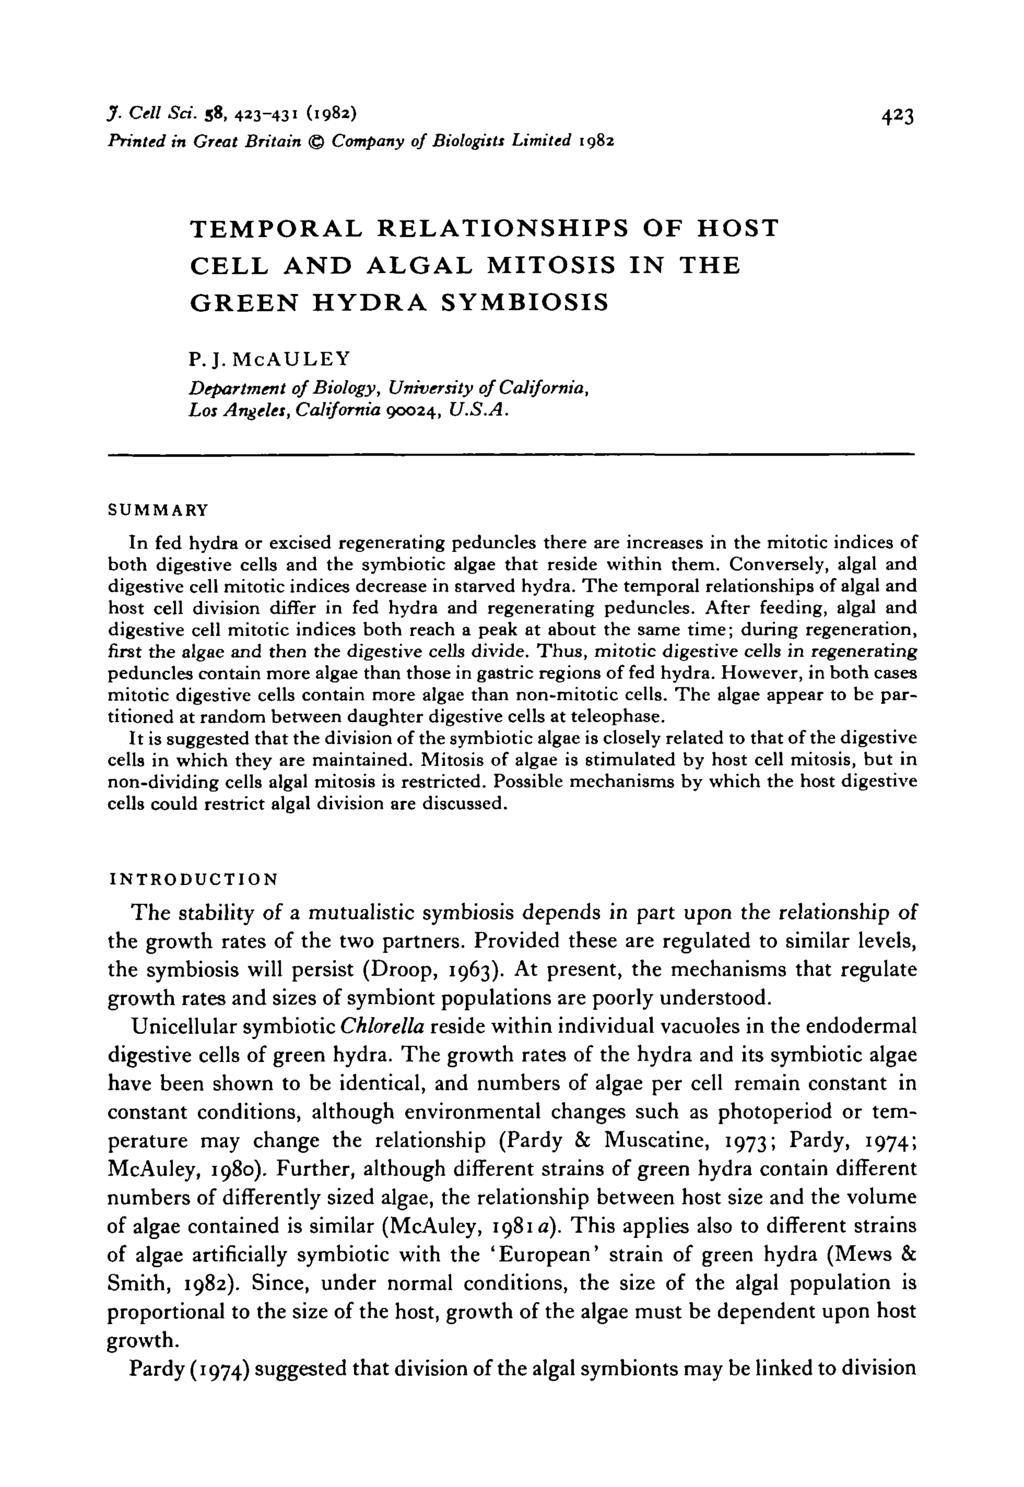 J. Cell Sci. 58, 423-431 (1982) 423 Printed in Great Britain Company of Biologists Limited 1982 TEMPORAL RELATIONSHIPS OF HOST CELL AND ALGAL MITOSIS IN THE GREEN HYDRA SYMBIOSIS P.J.McAULEY Department of Biology, University of California, Los Angeles, California 90024, U.